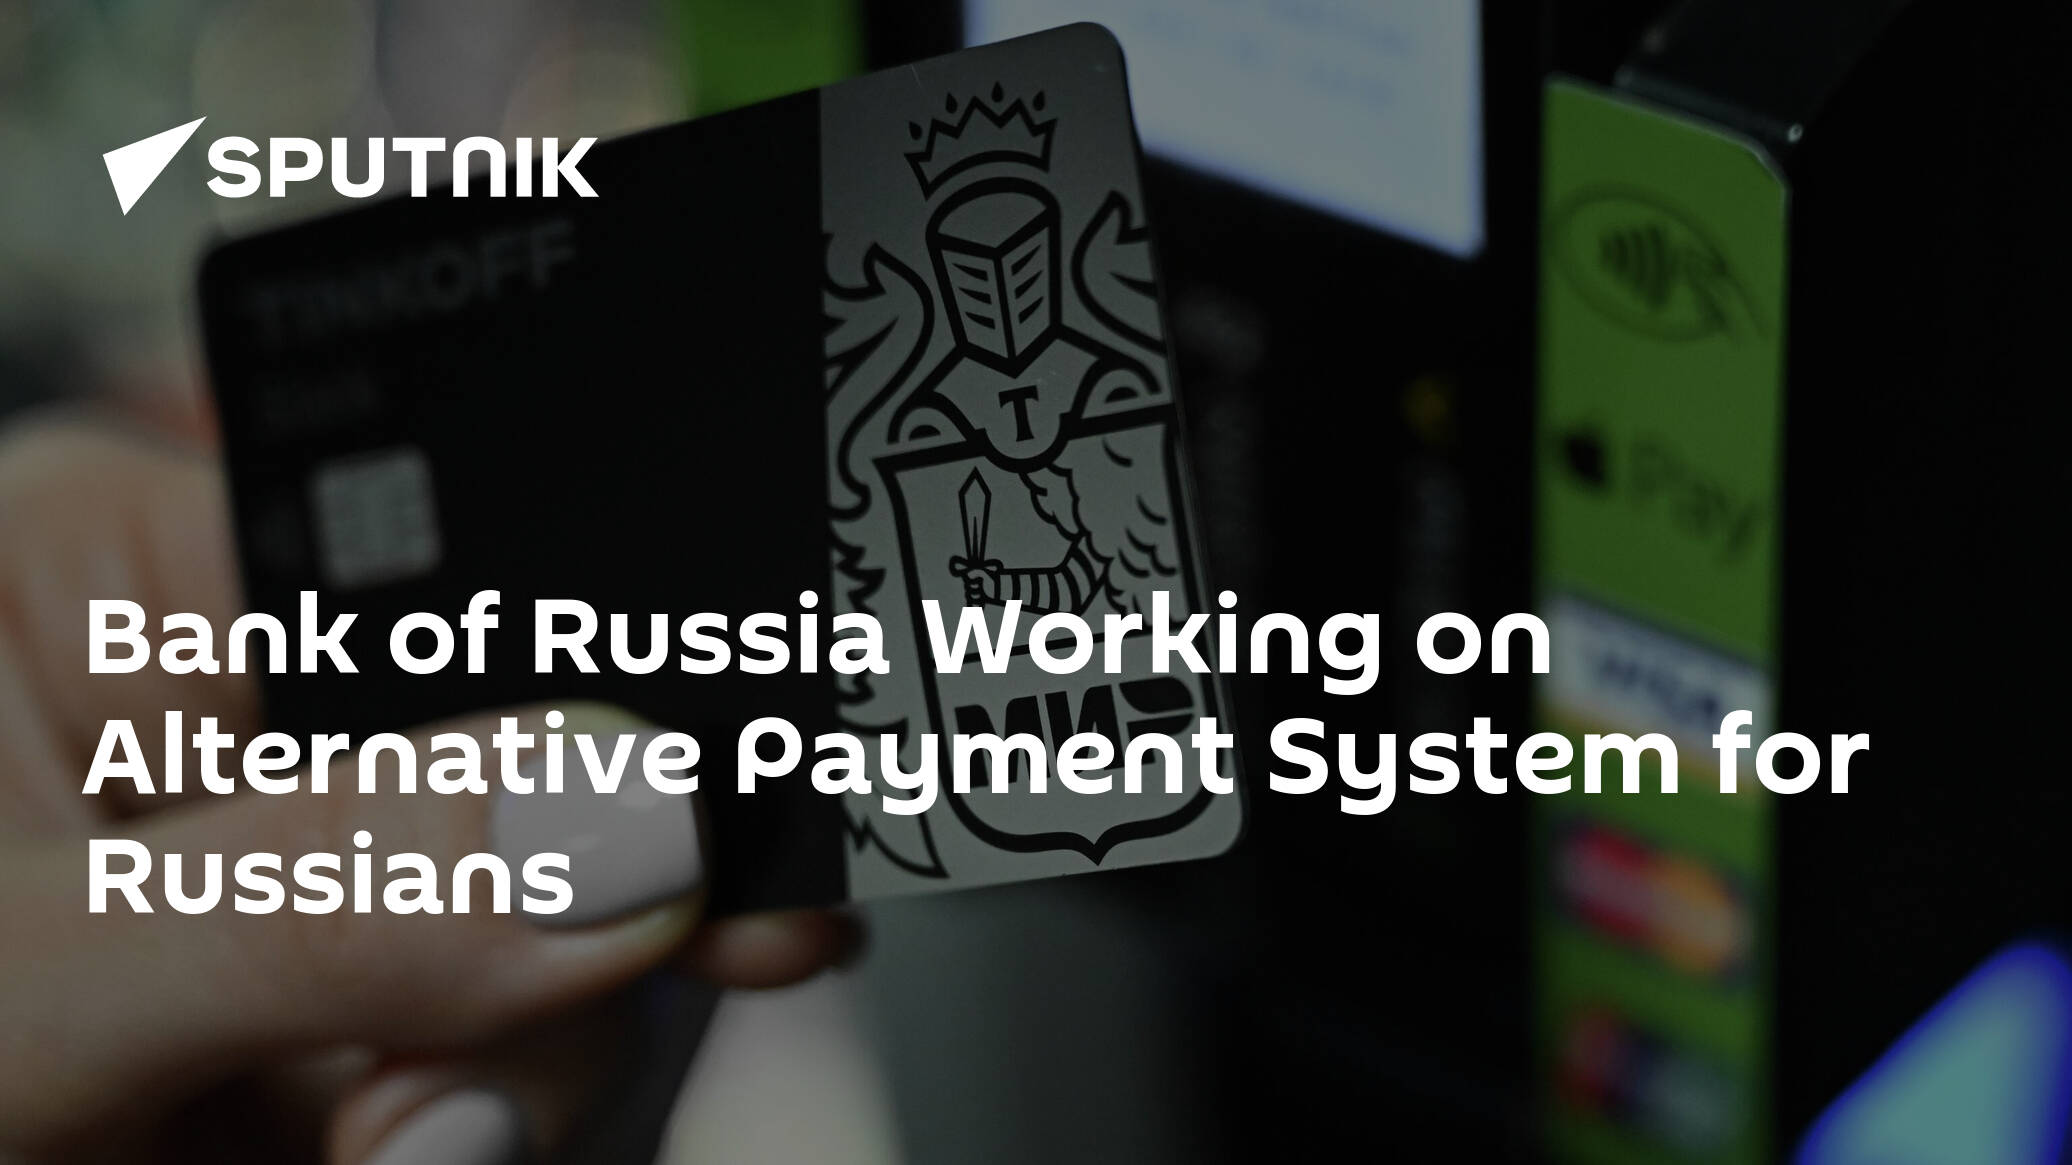 Bank of Russia Working on Alternative Payment System for Russians